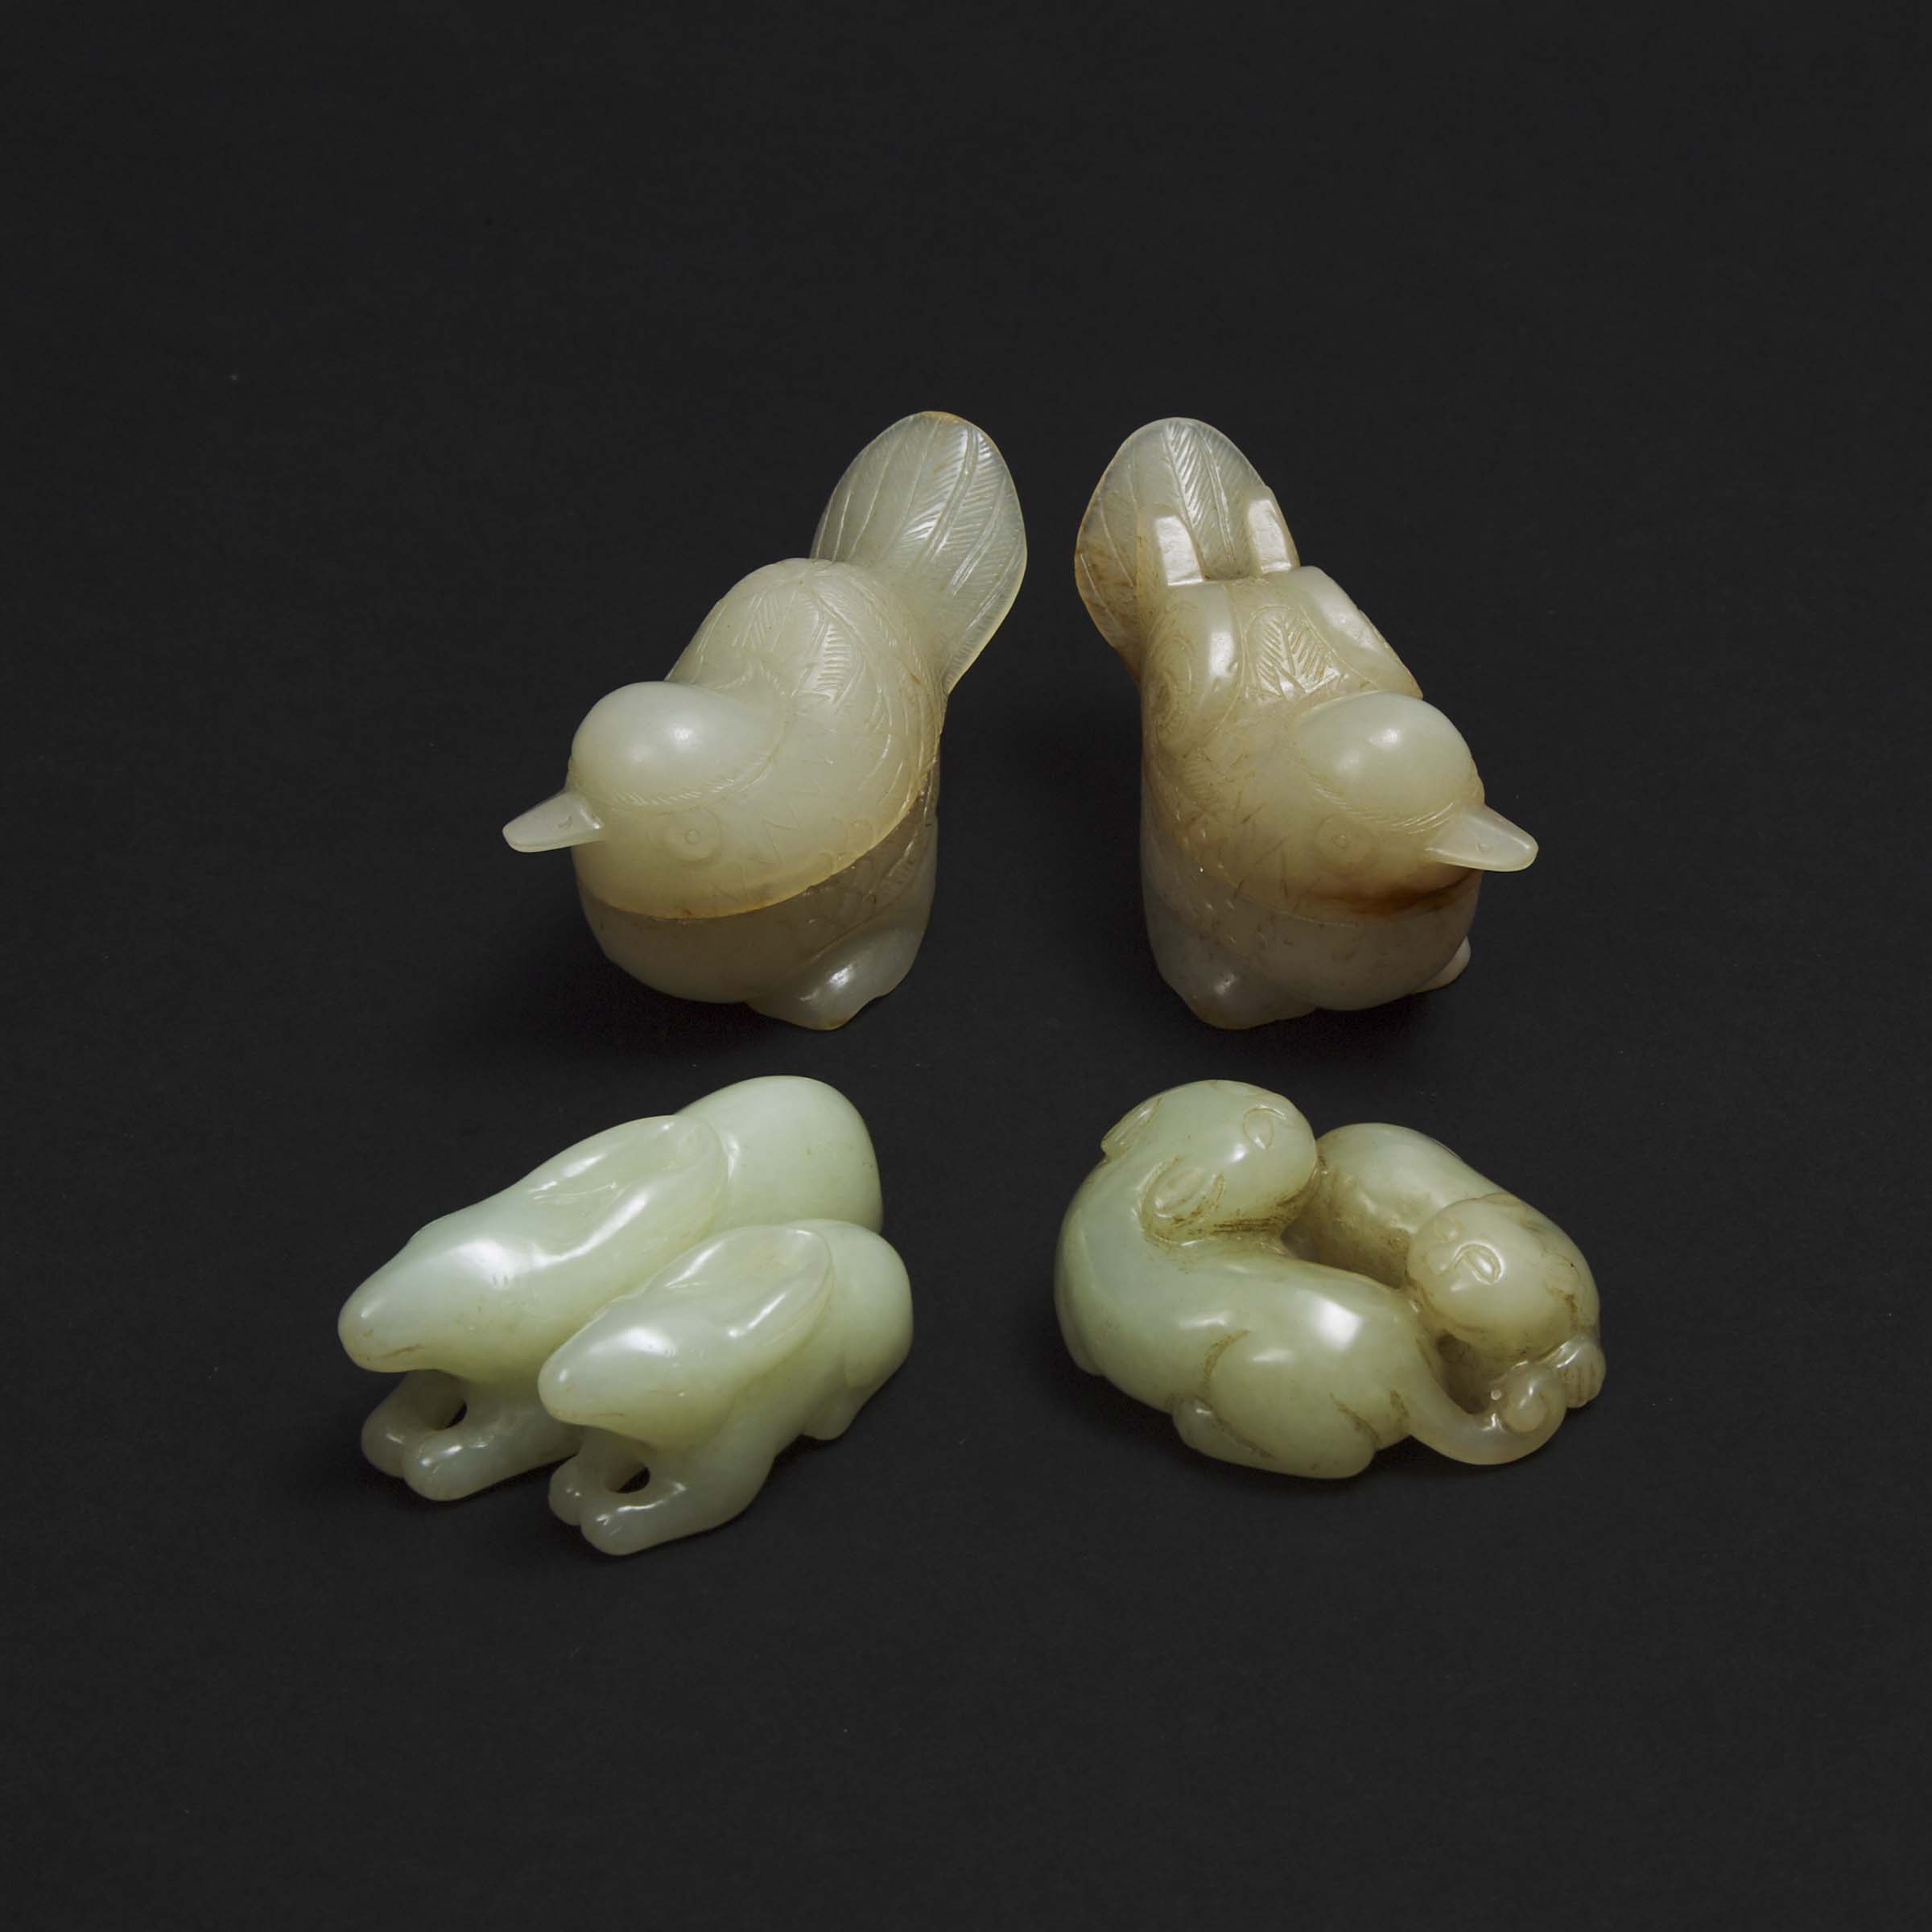 A Jade 'Twin Badger' Group, a Rabbit Group, and a Pair of 'Magpie' Boxes and Covers